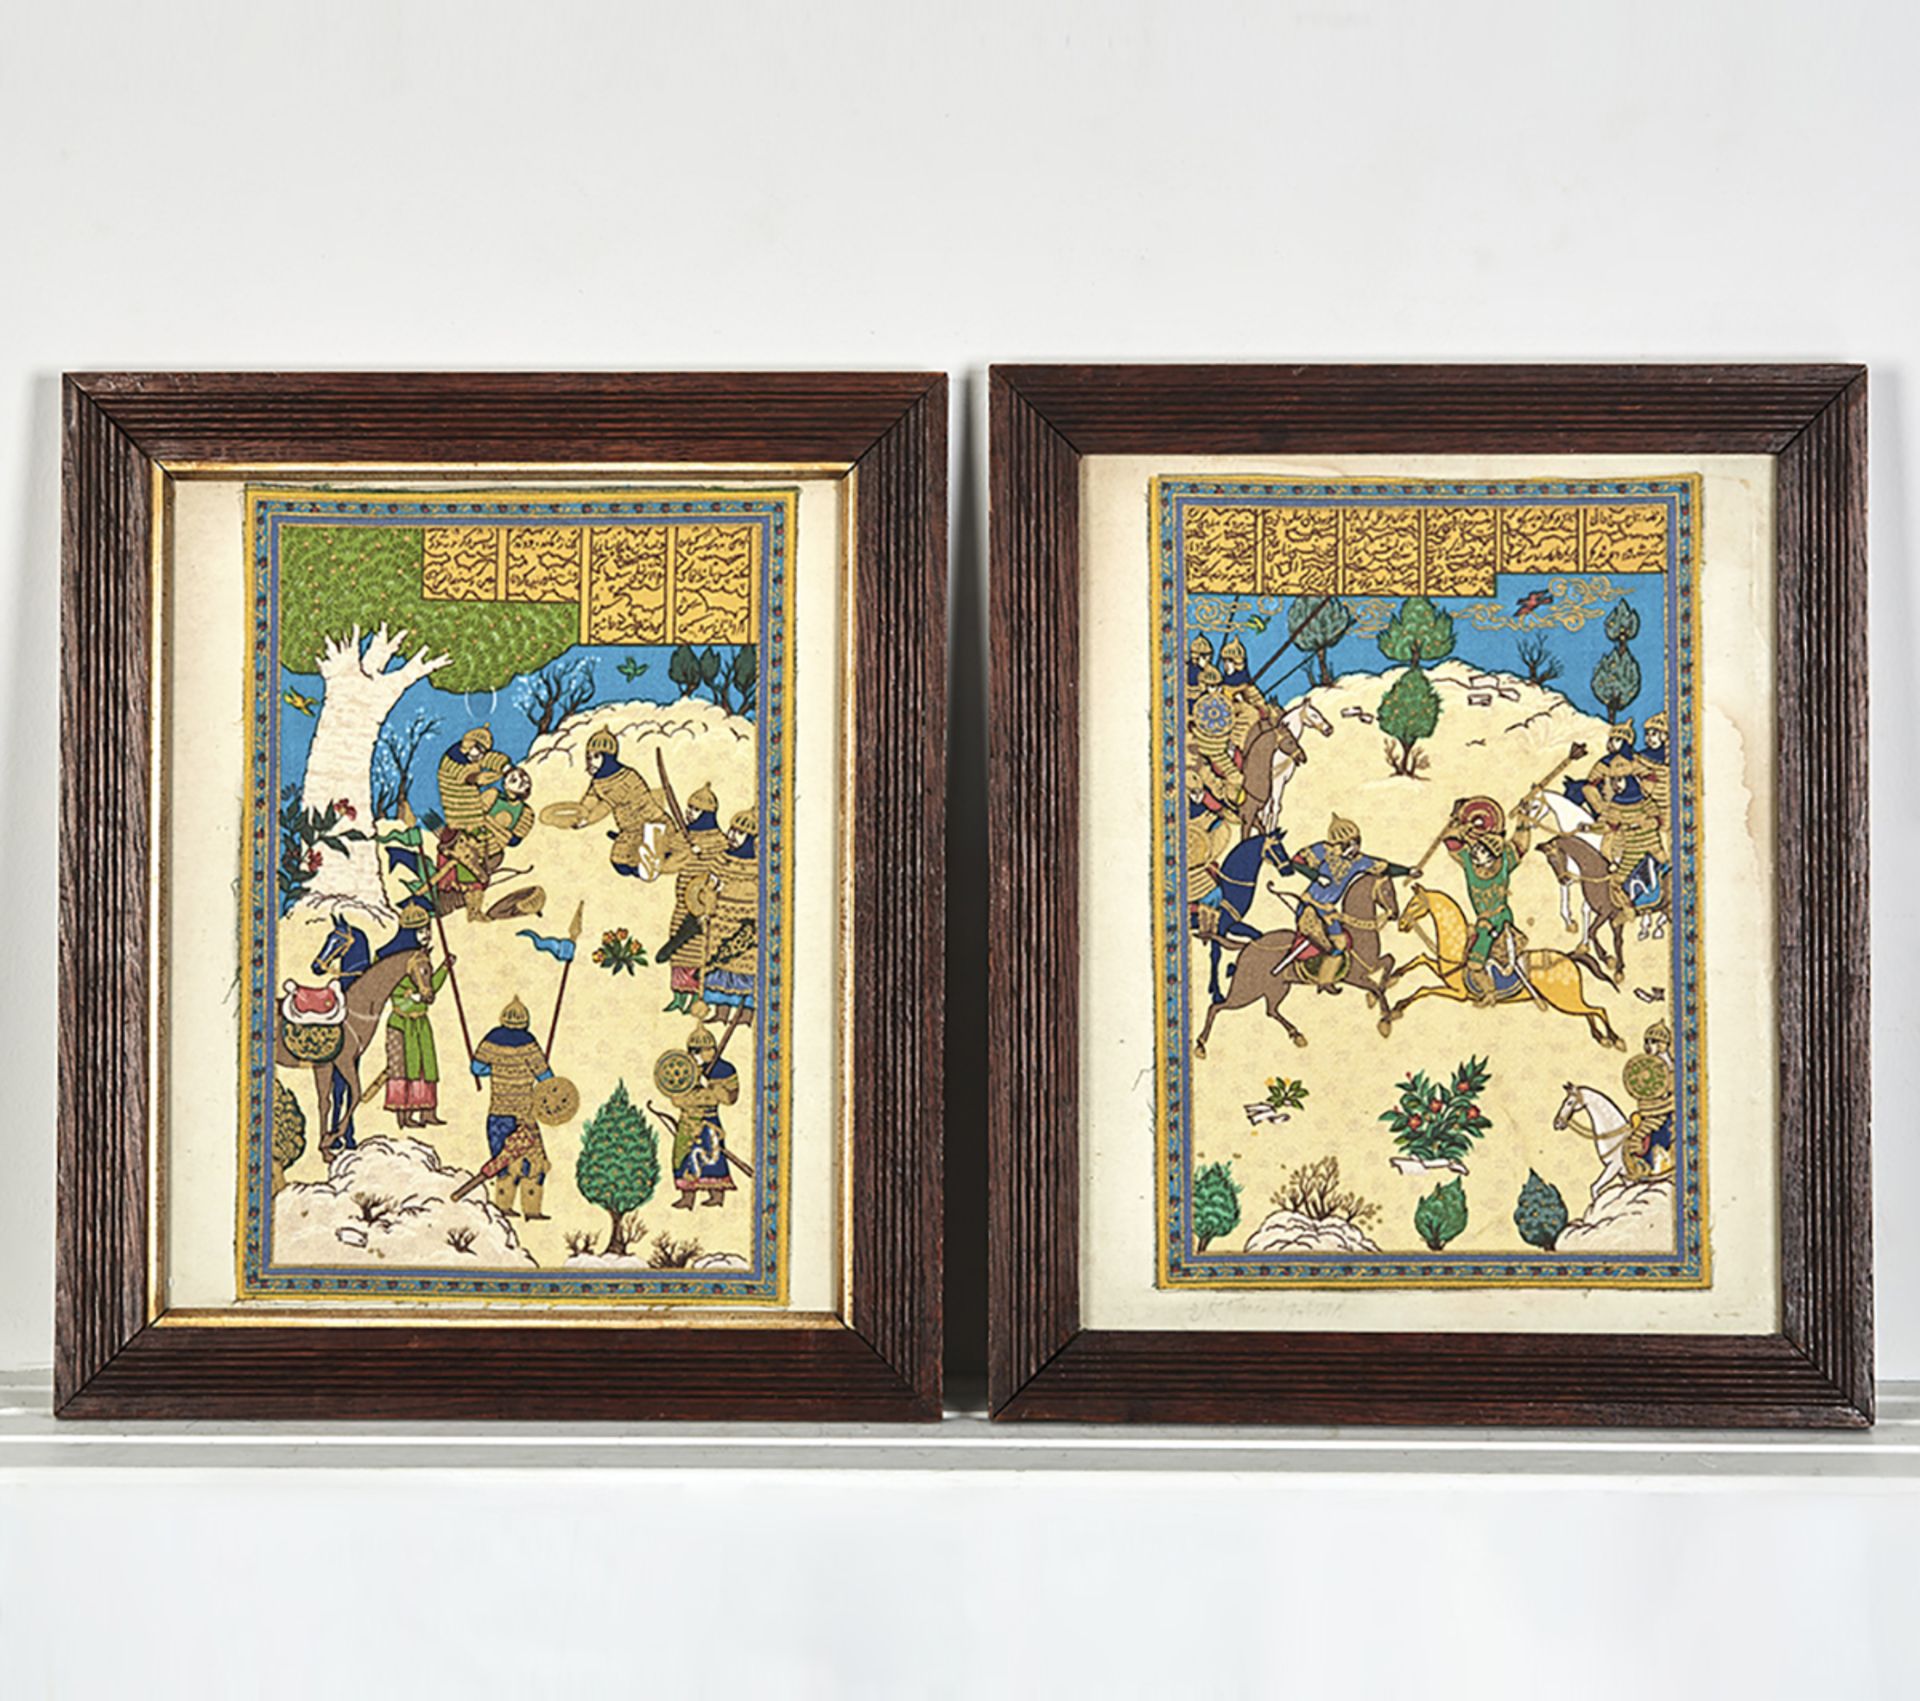 PAIR PERSIAN HUNTING SCENES ON FABRIC, EARLY 20TH C. - Image 8 of 8